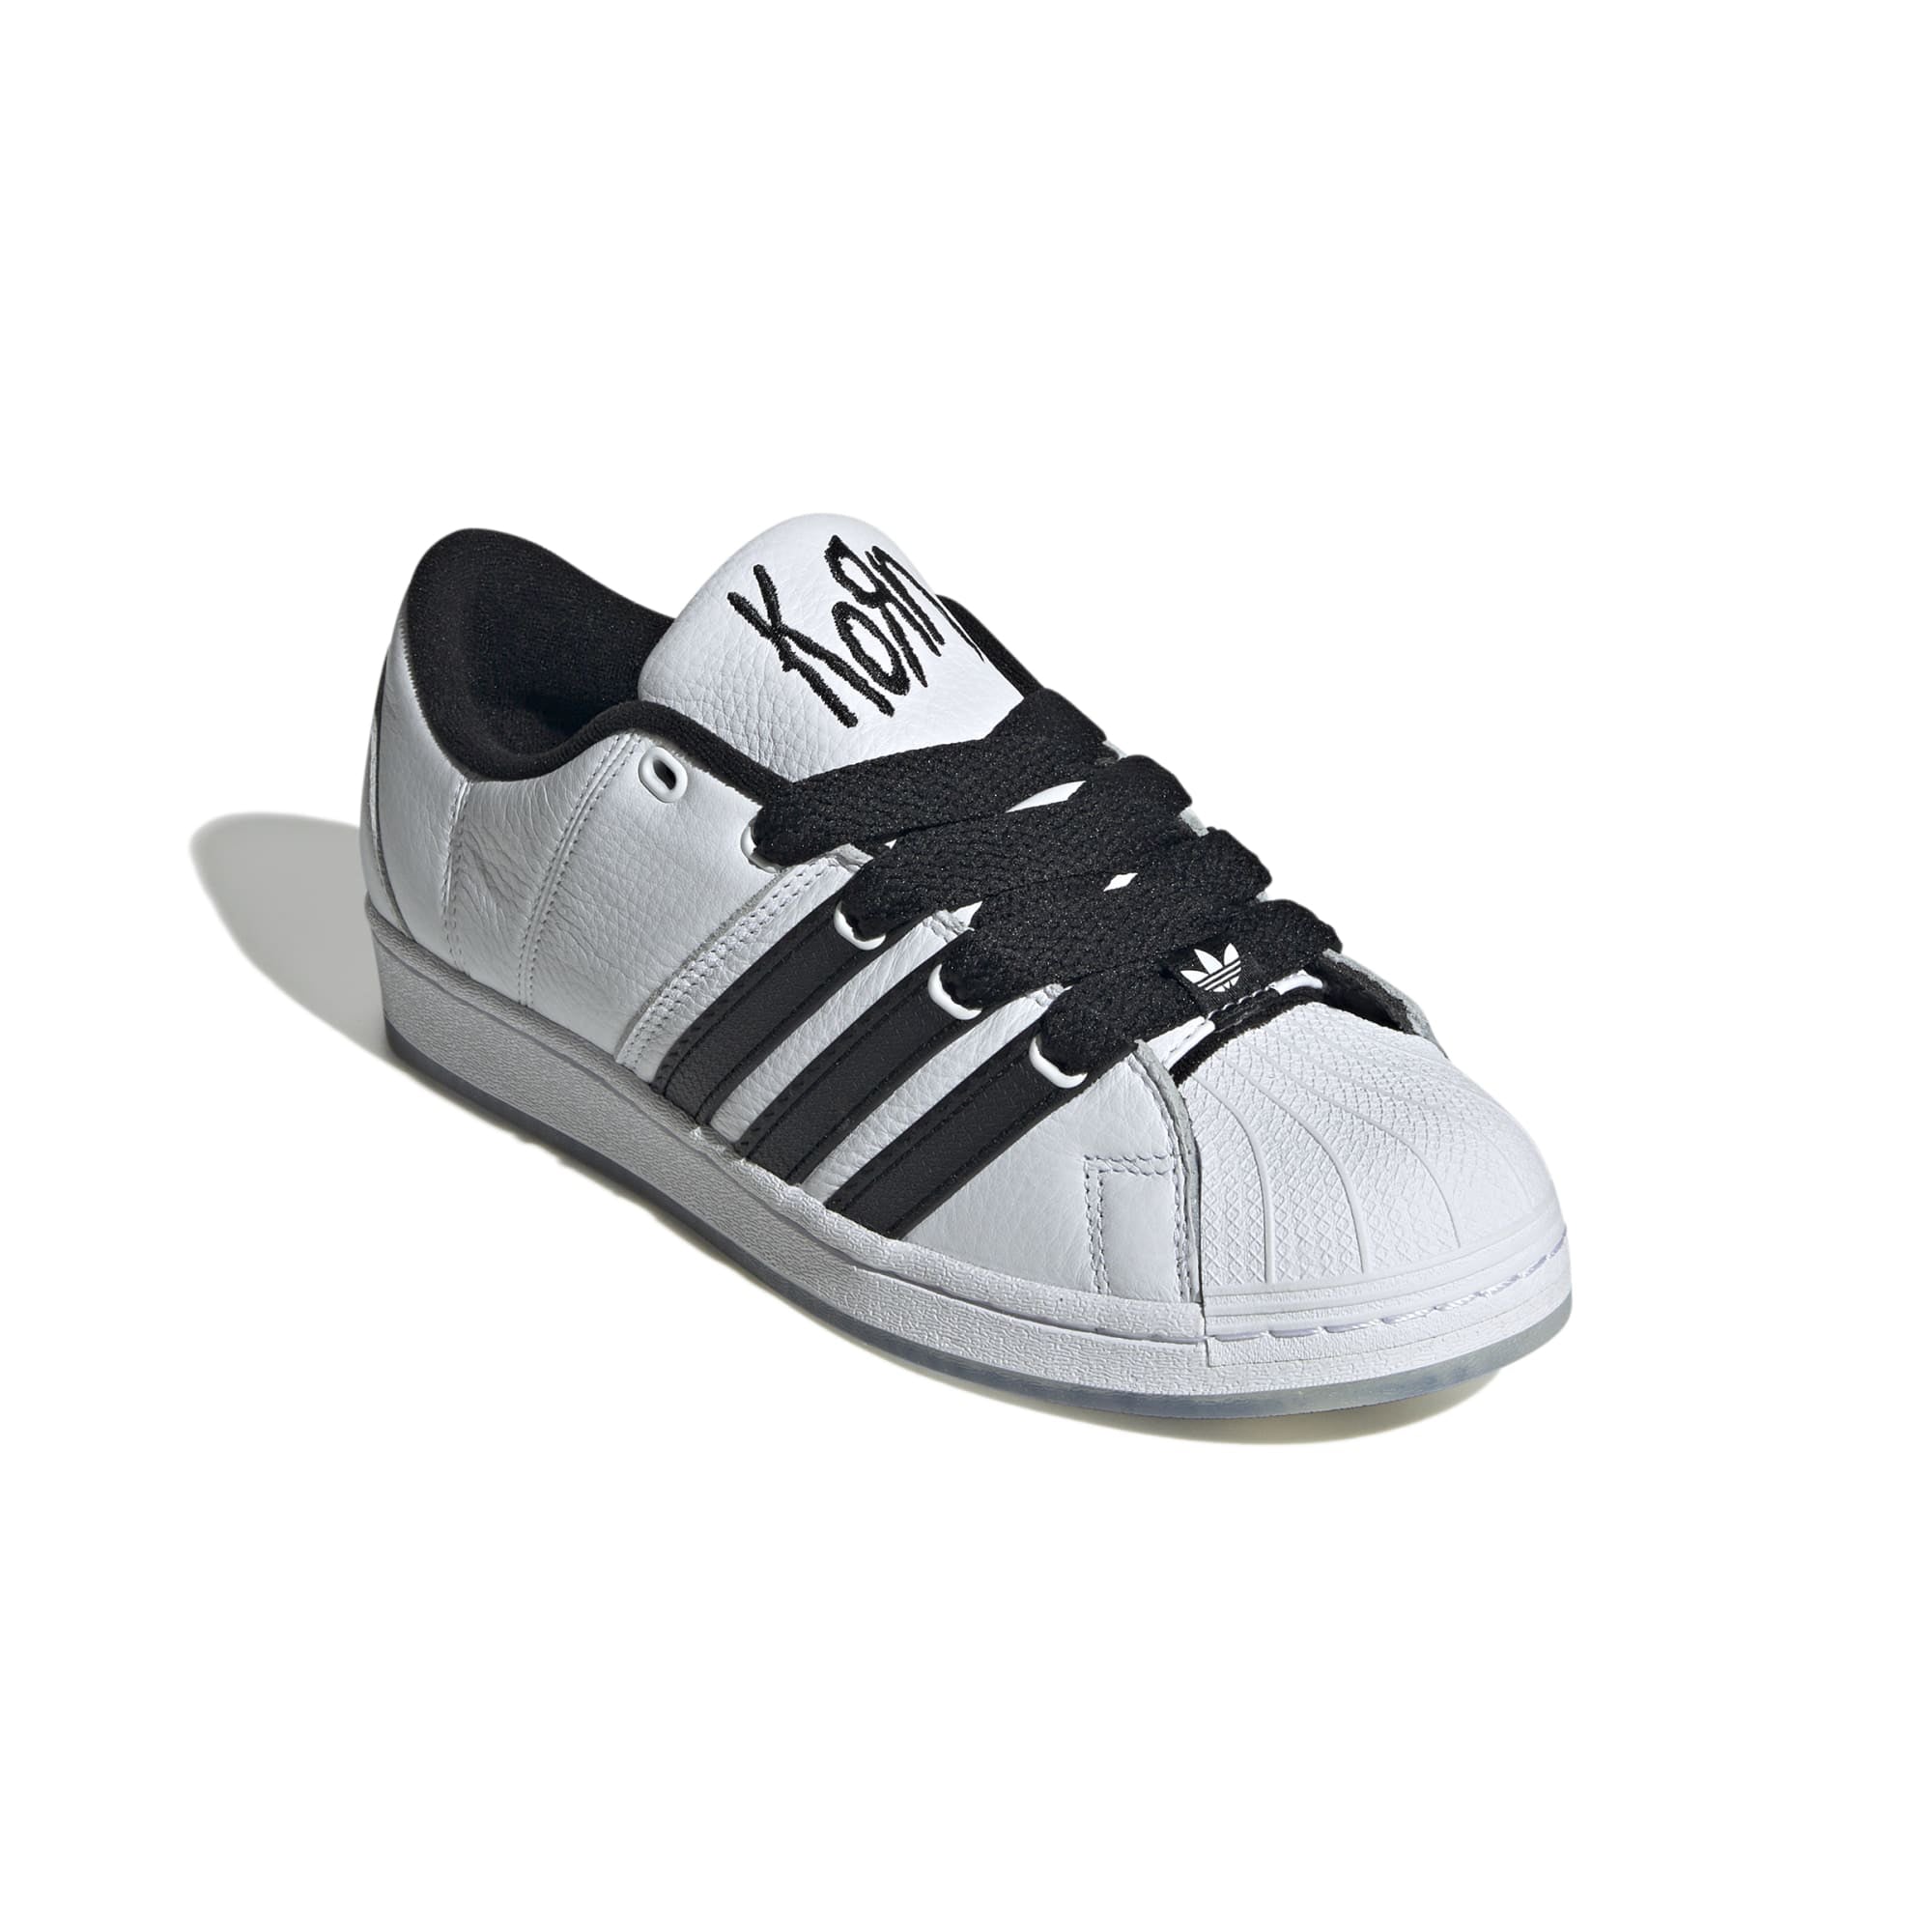 Adidas x Korn Supermodified Shoes – Extra Butter